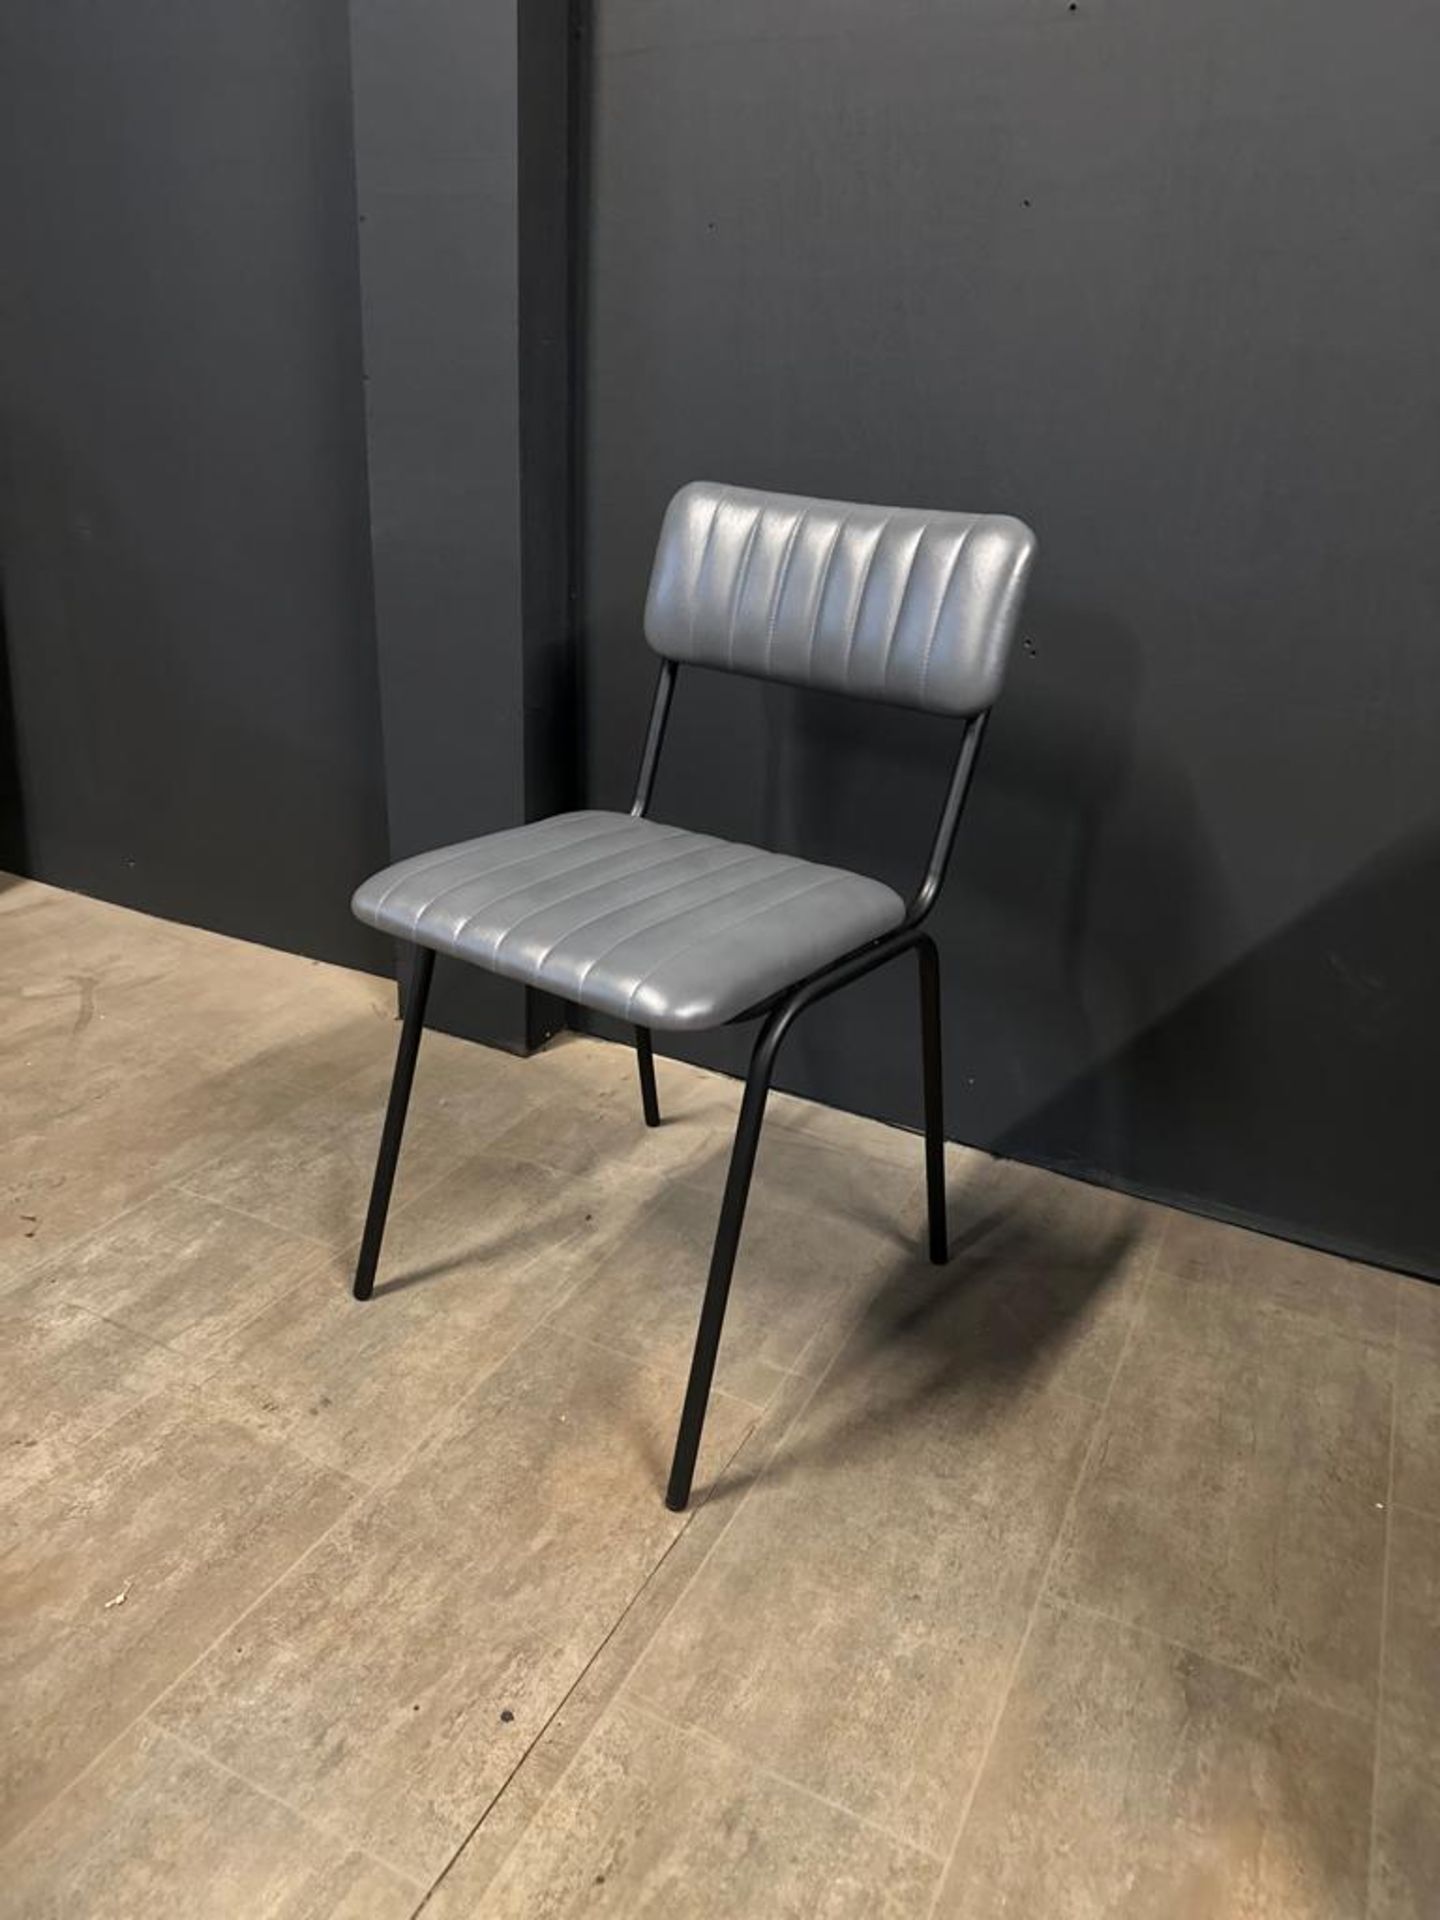 PAIR OF NEW BOXED INDUSTRIAL VINTAGE STYLE DINING CHAIRS WITH RIBBED LEATHER IN GREY - Image 2 of 2